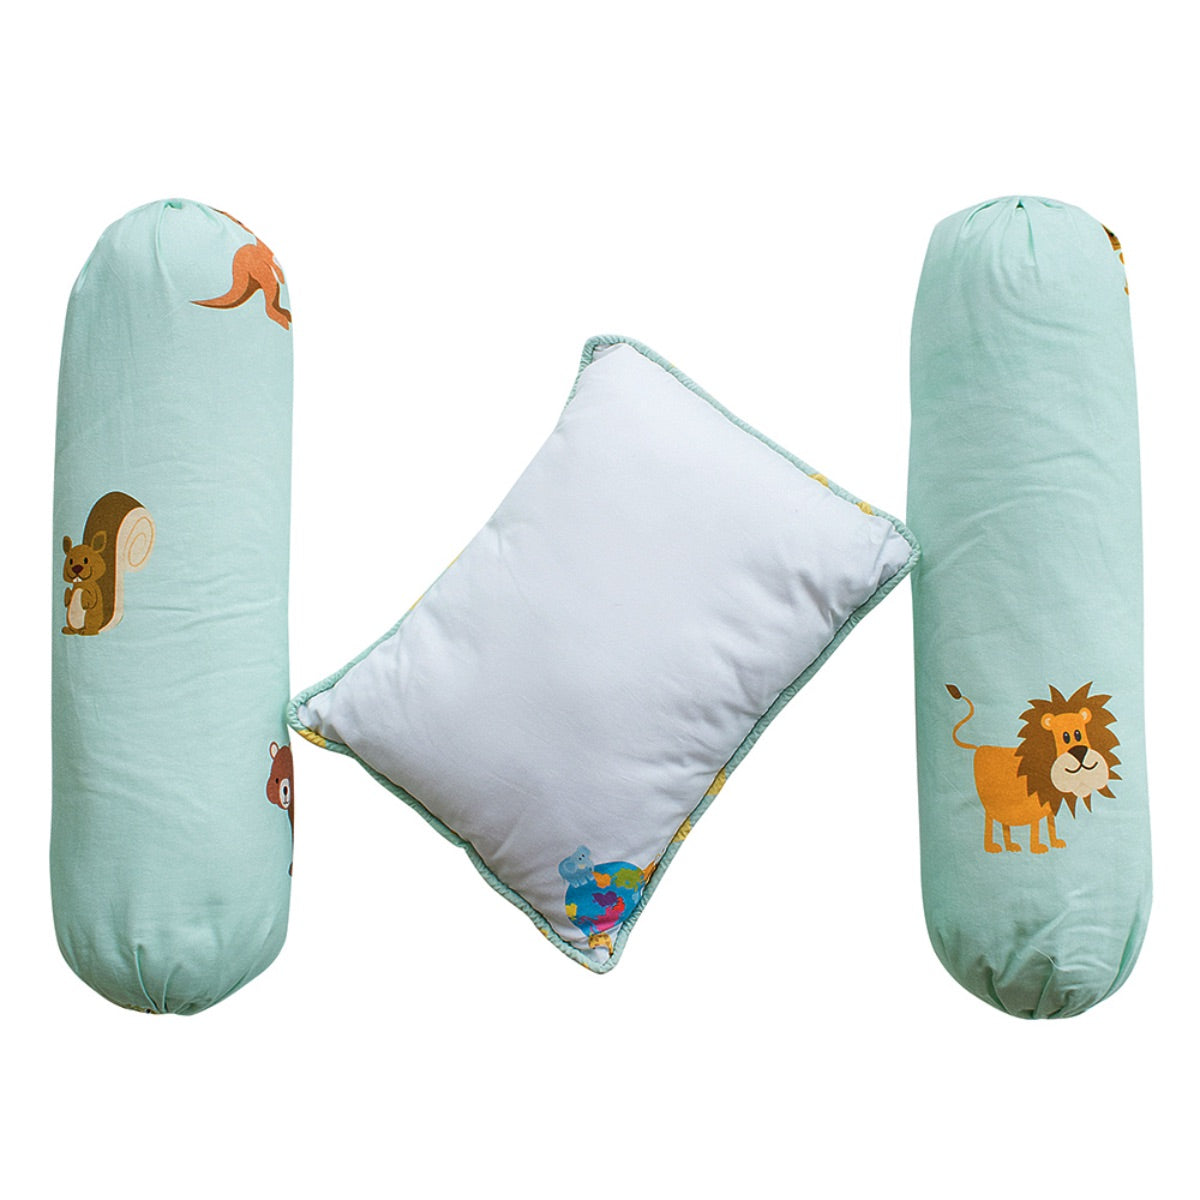 Little By Little Animals Around The World Baby Pillow & Bolster, Mint